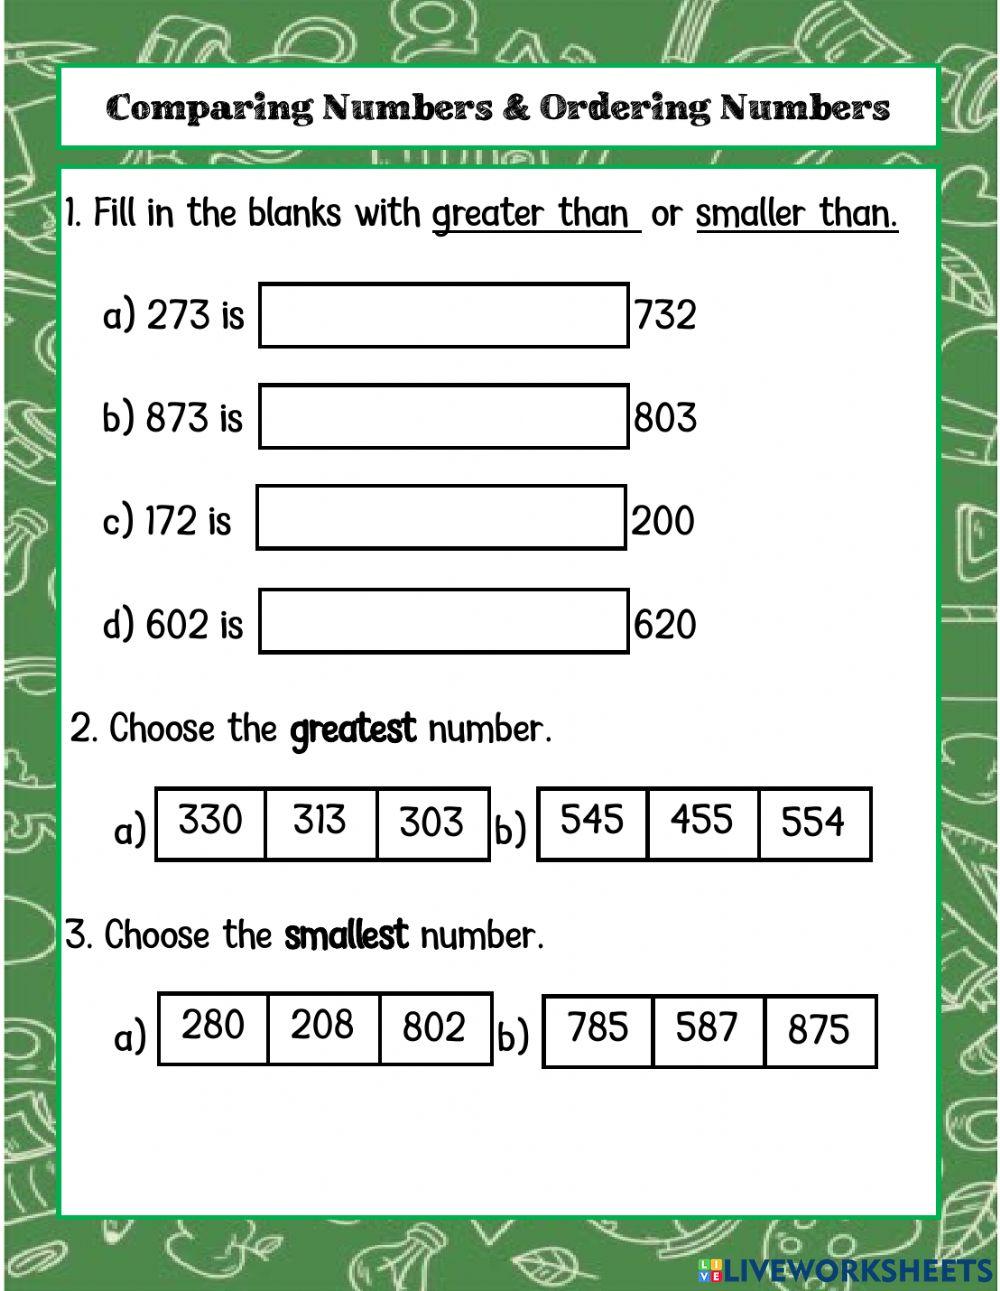 Compare and Order Numbers